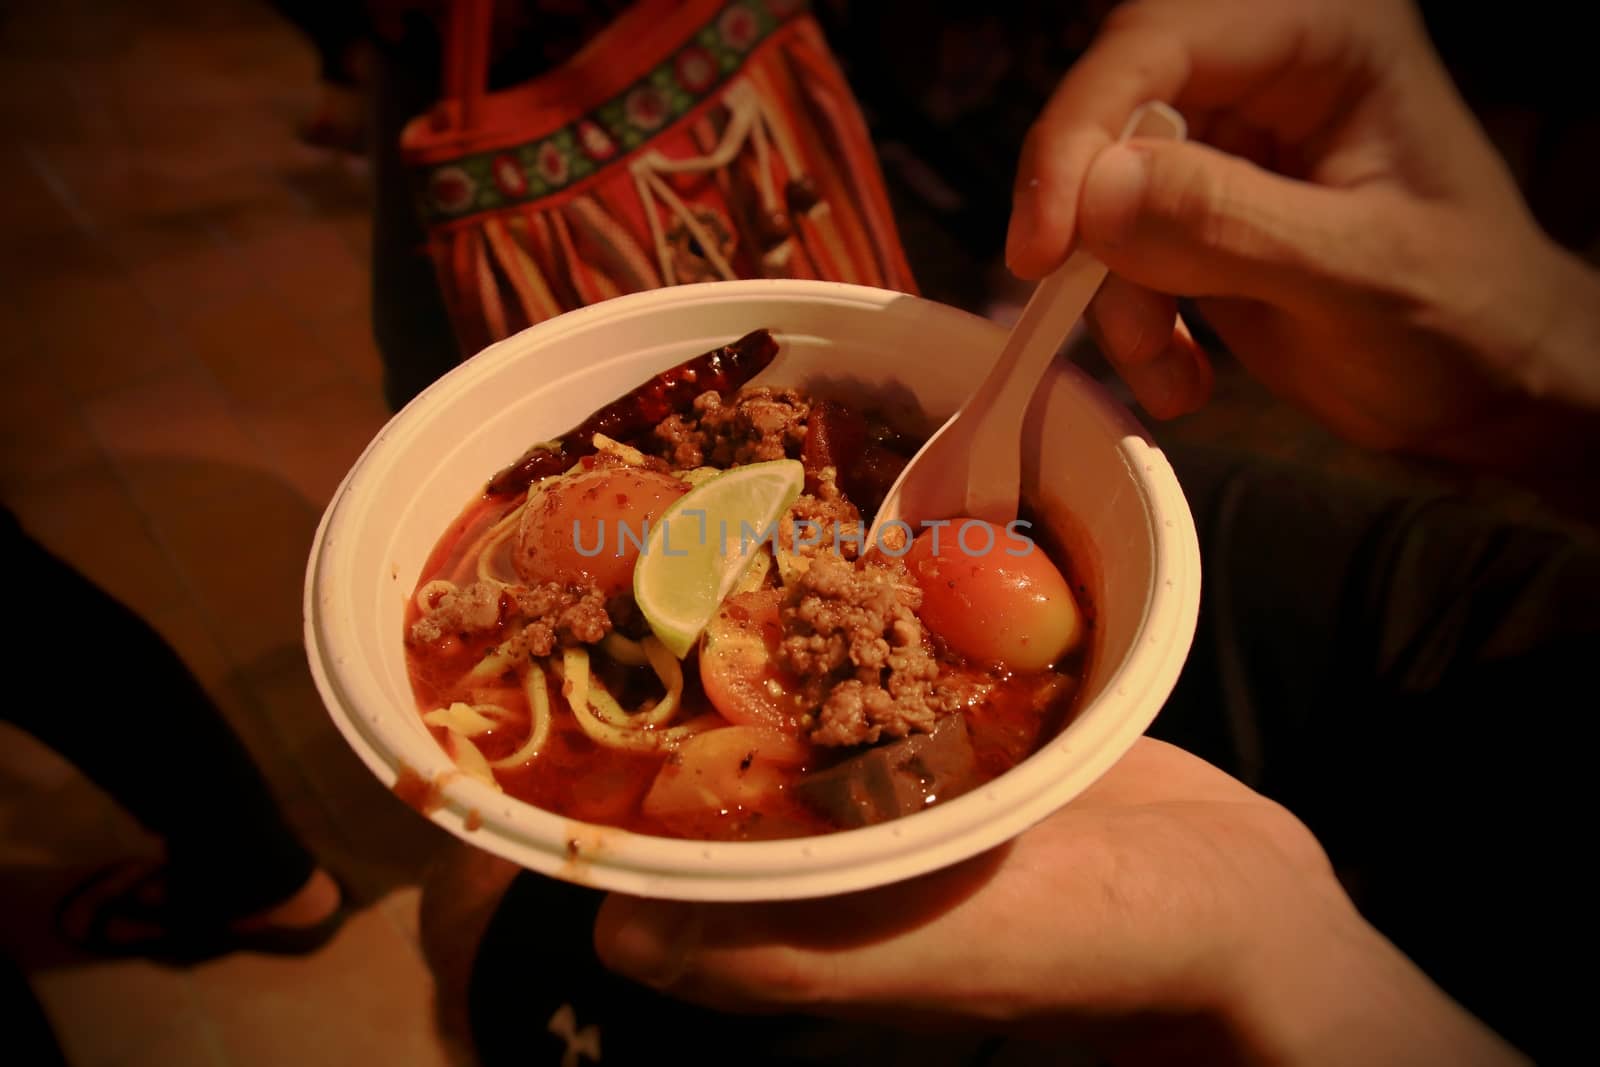 Laksa soup made from wheat noodles and spicy curry coconut milk, a popular dish in Peranakan or Malaysian cuisine